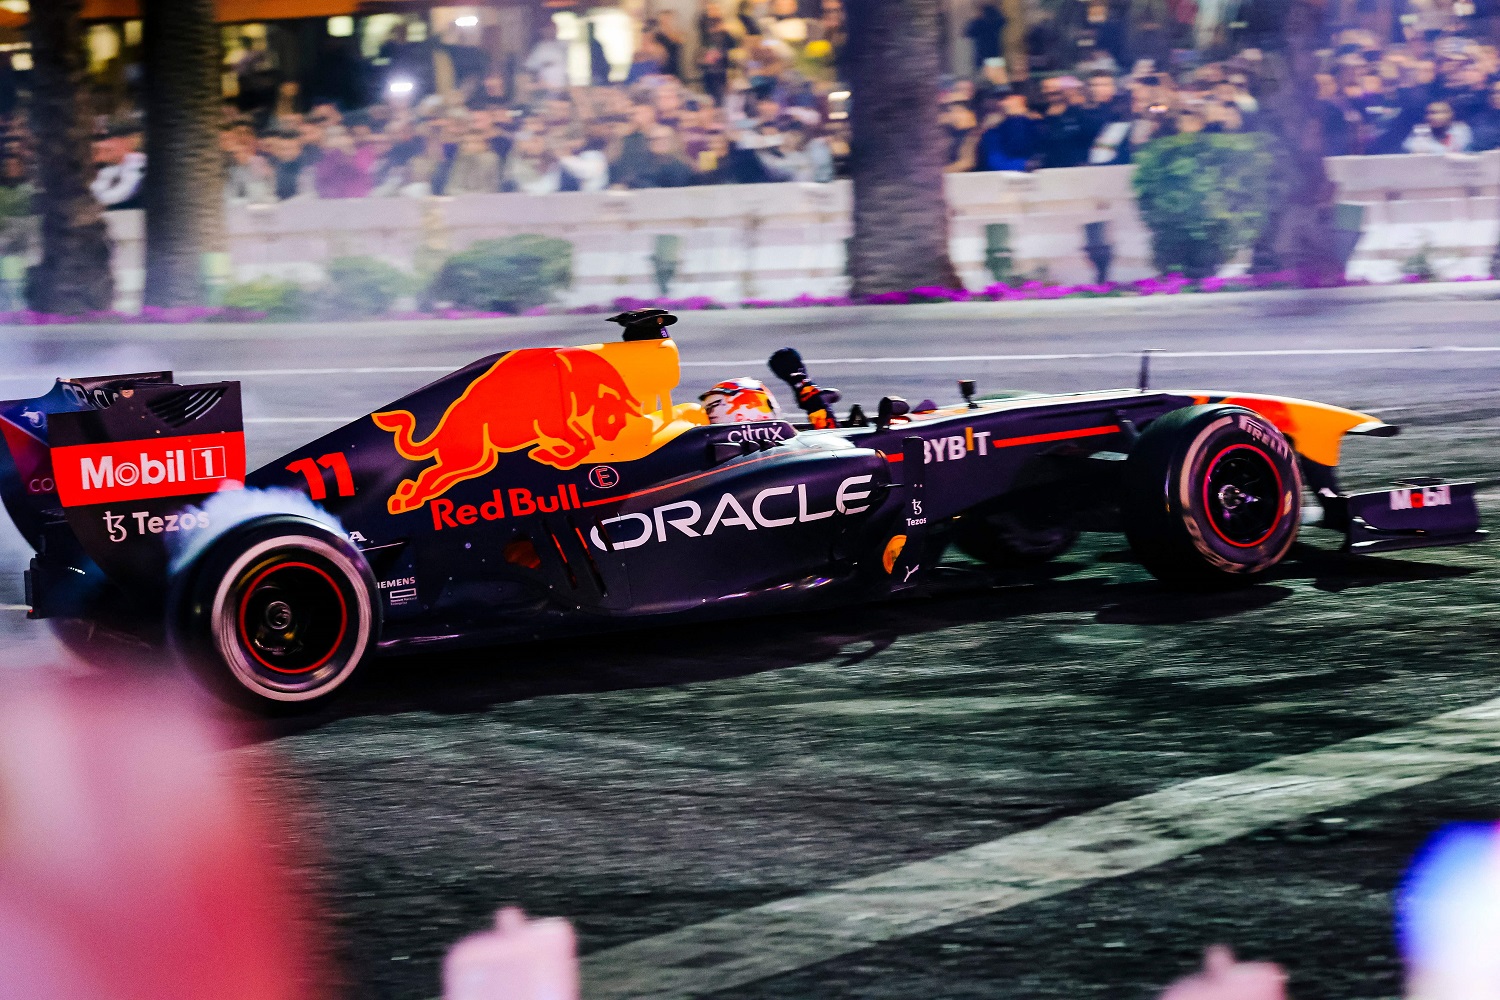 A Formula 1 racing team car from Oracle Red Bull Racing burns out on the Las Vegas Strip during the Las Vegas Grand Prix launch party on Nov. 5, 2022.